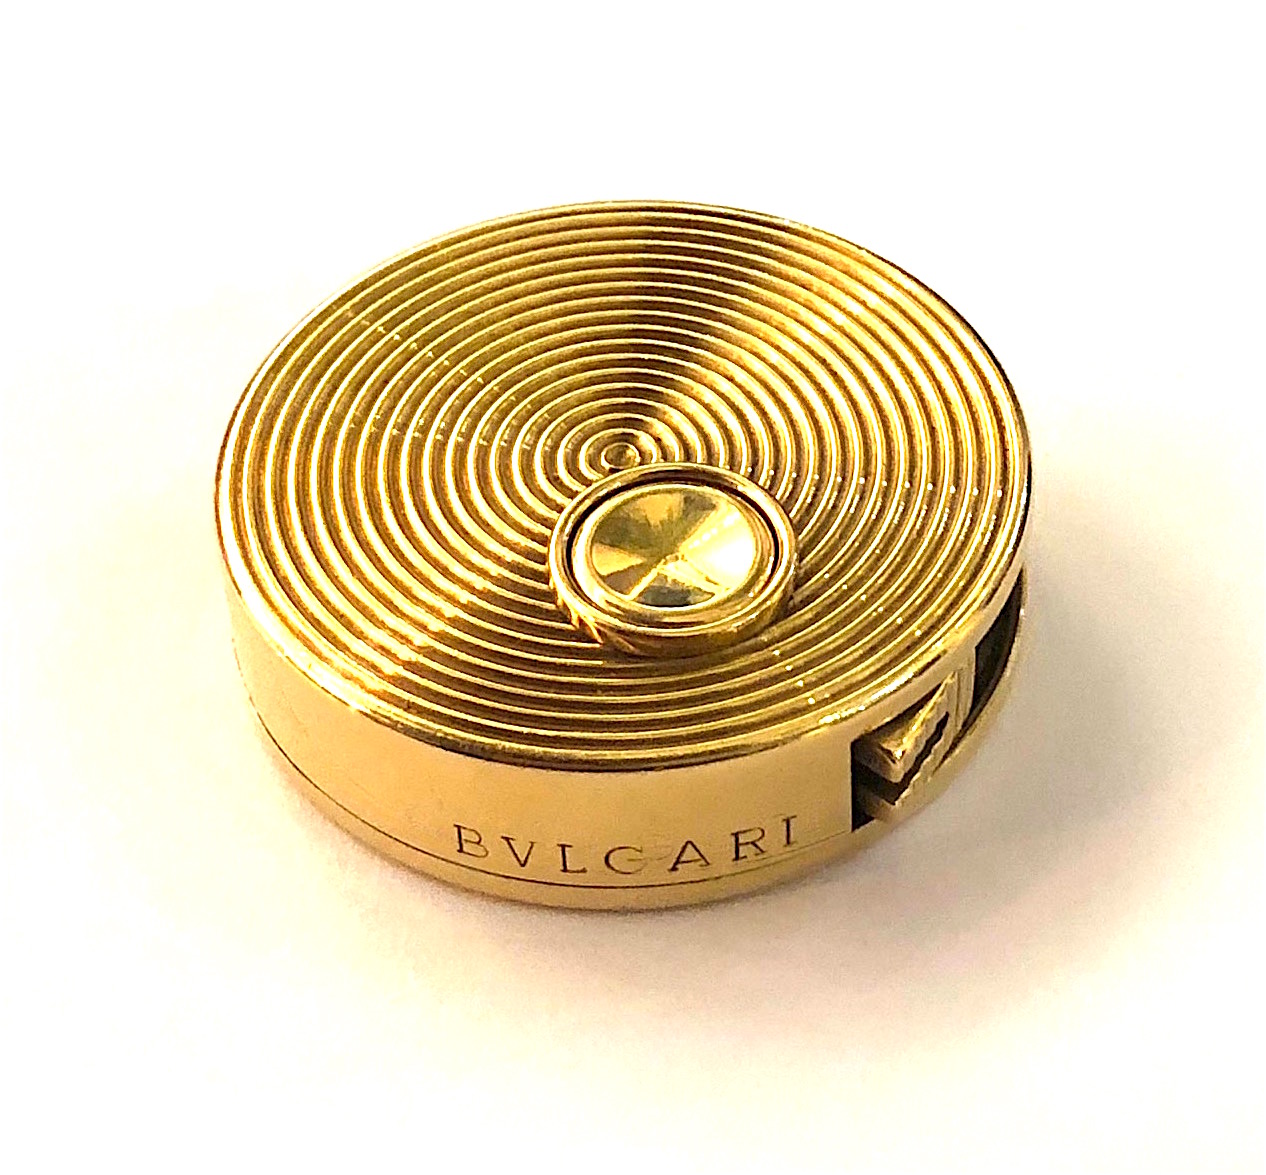 Bulgari, Rome, “Pocket Tape Measure” lighter, 18k gold with a concentric ring detail on both the top and the underside, signed: BVLGARI, BB back to back in a hexagon maker’s mark, 750 (in a rectangle), Swiss made, G. 137, original signed blue leather box with a tan suede interior, c. 1970’s